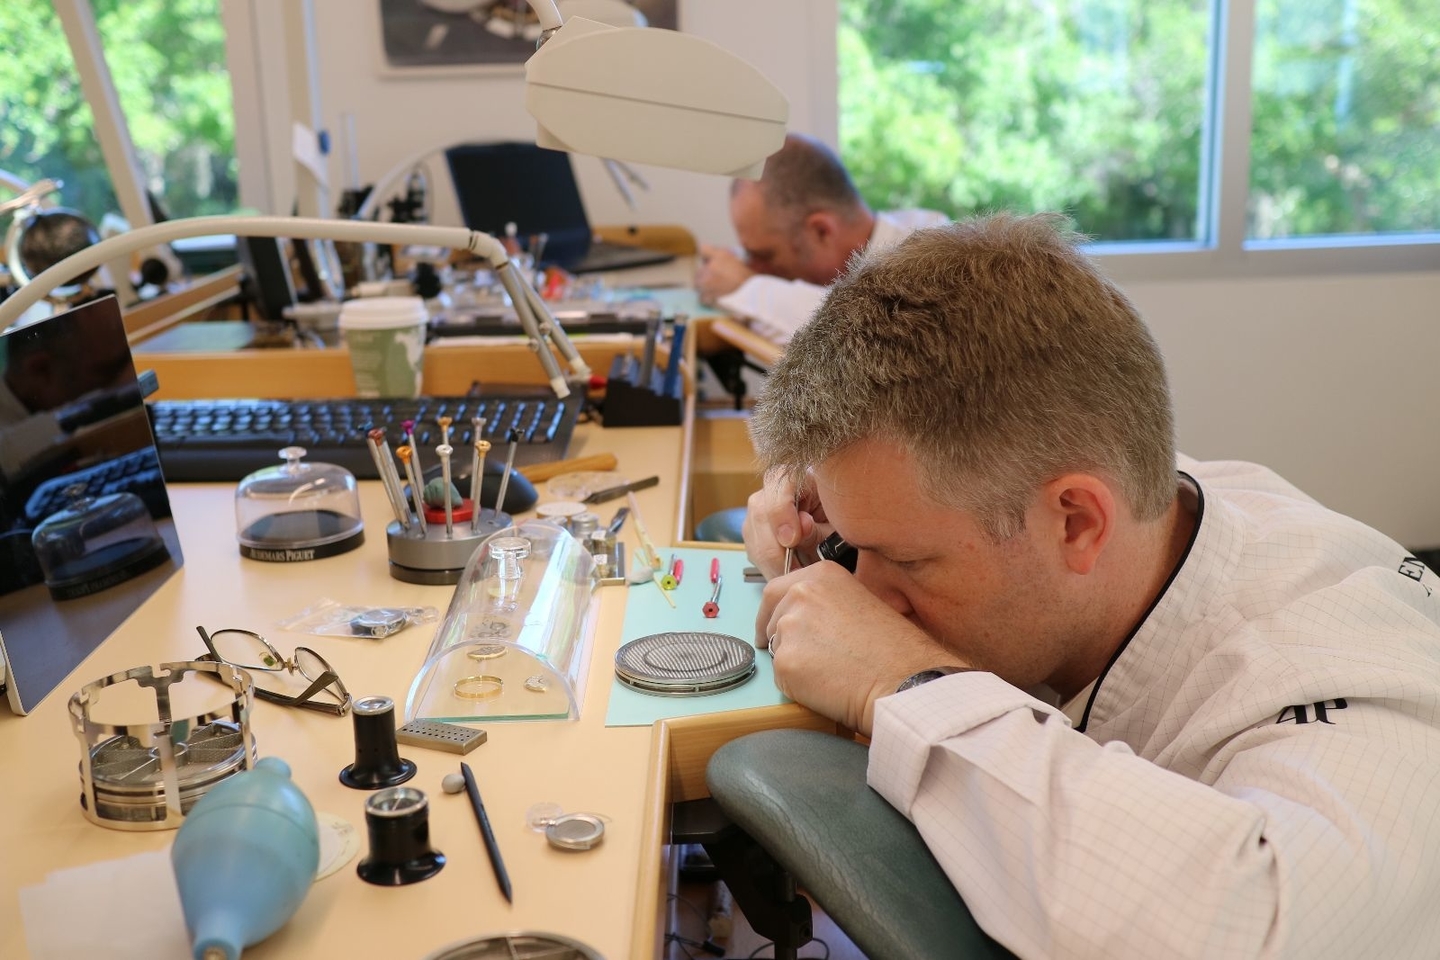 A step inside of Audemars Piguet’s US Service Center to see my Royal Oak receive a factory service (Part I)